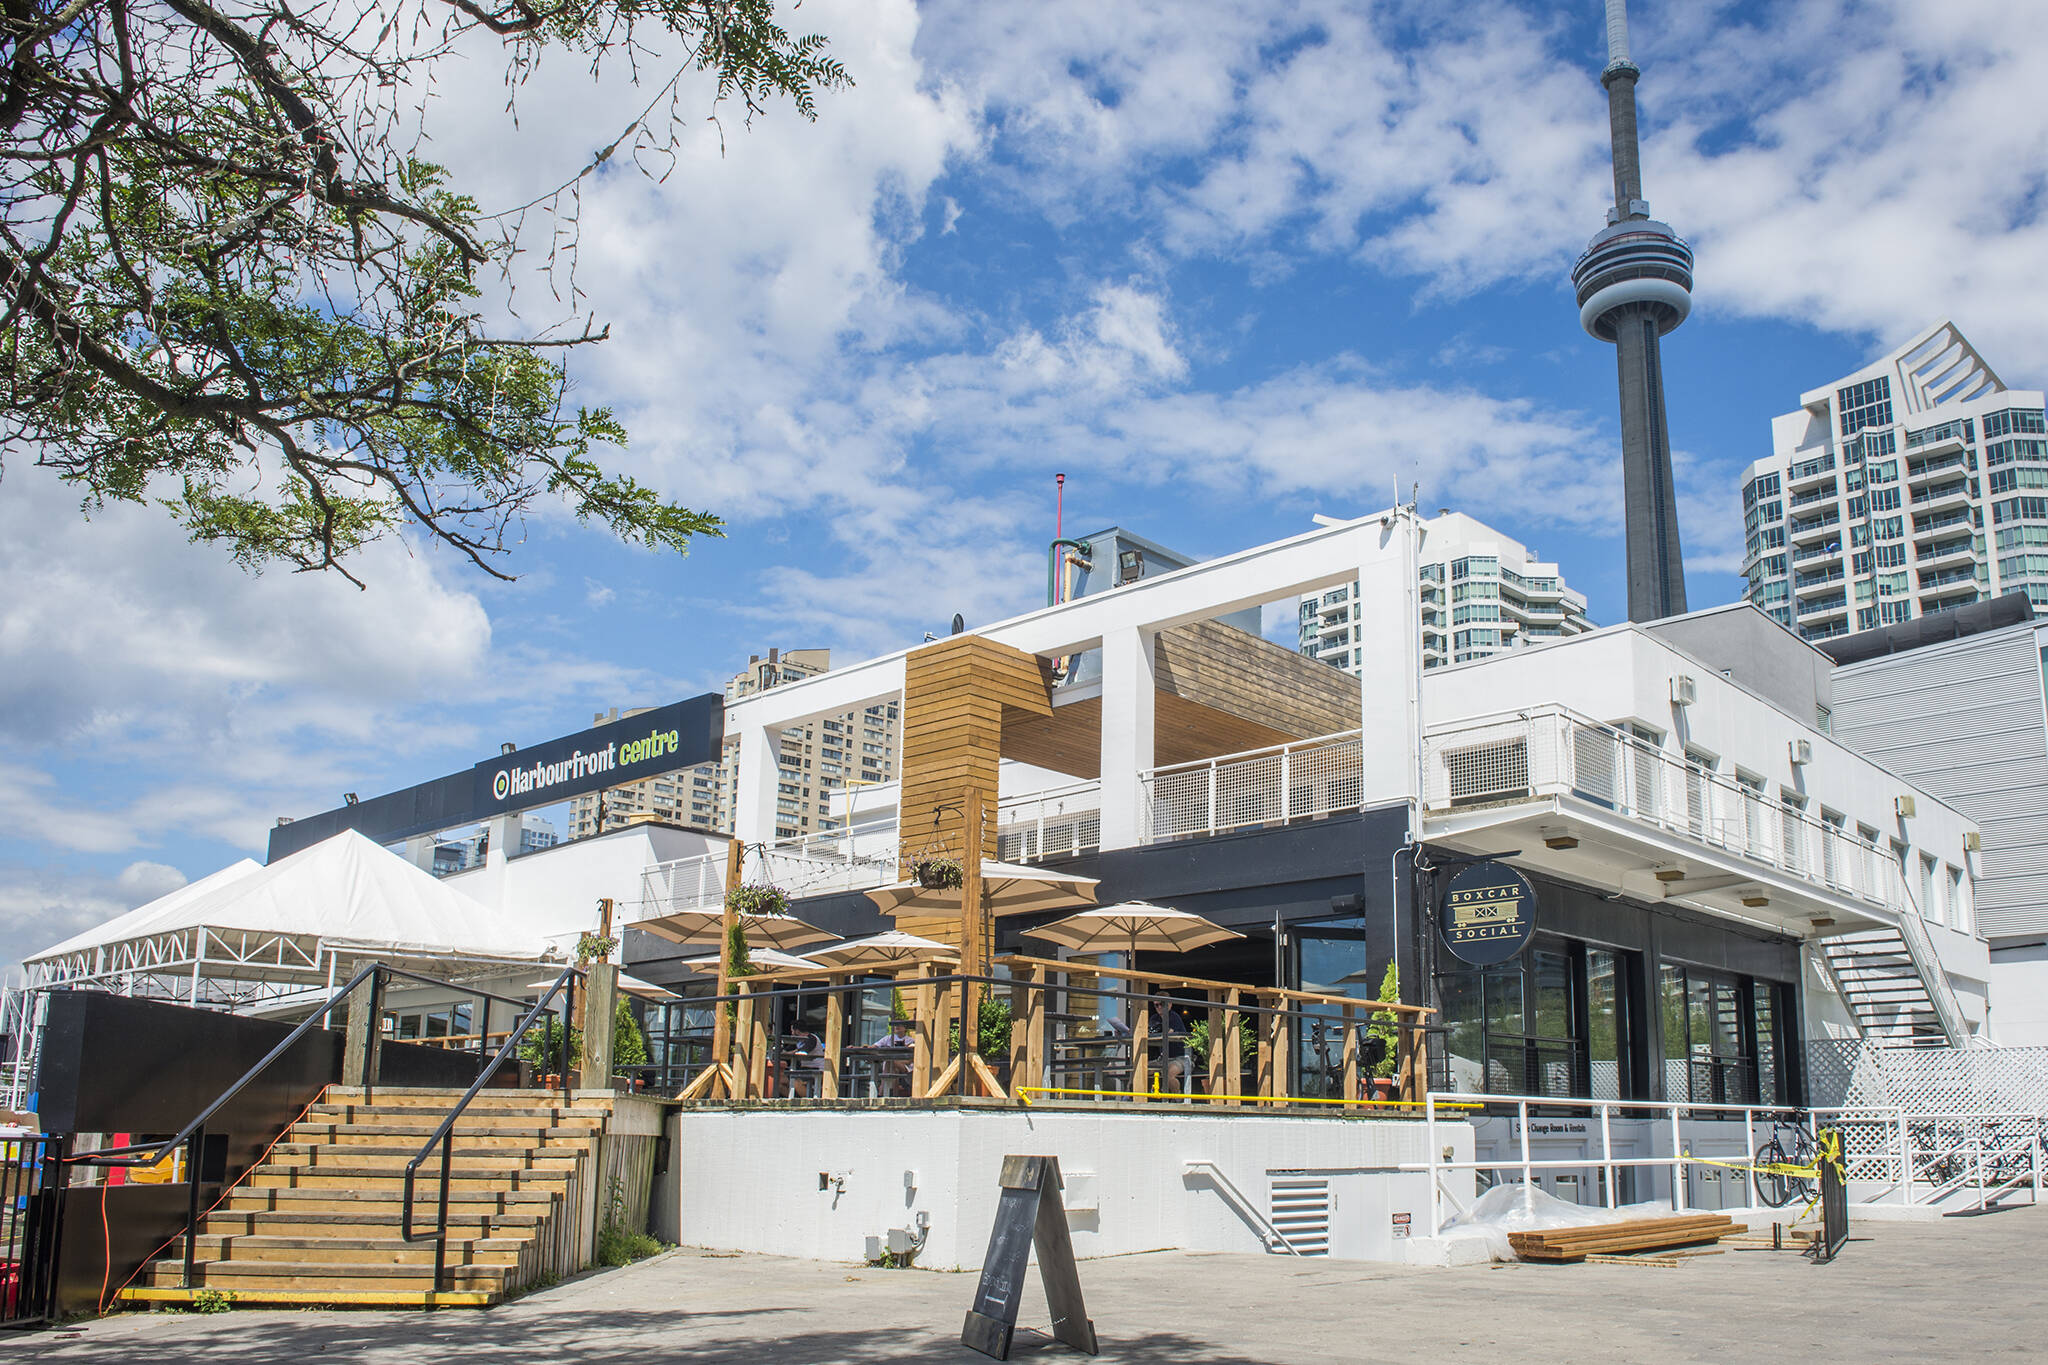 Harbourfront Centre is $1 million behind in paying its rent